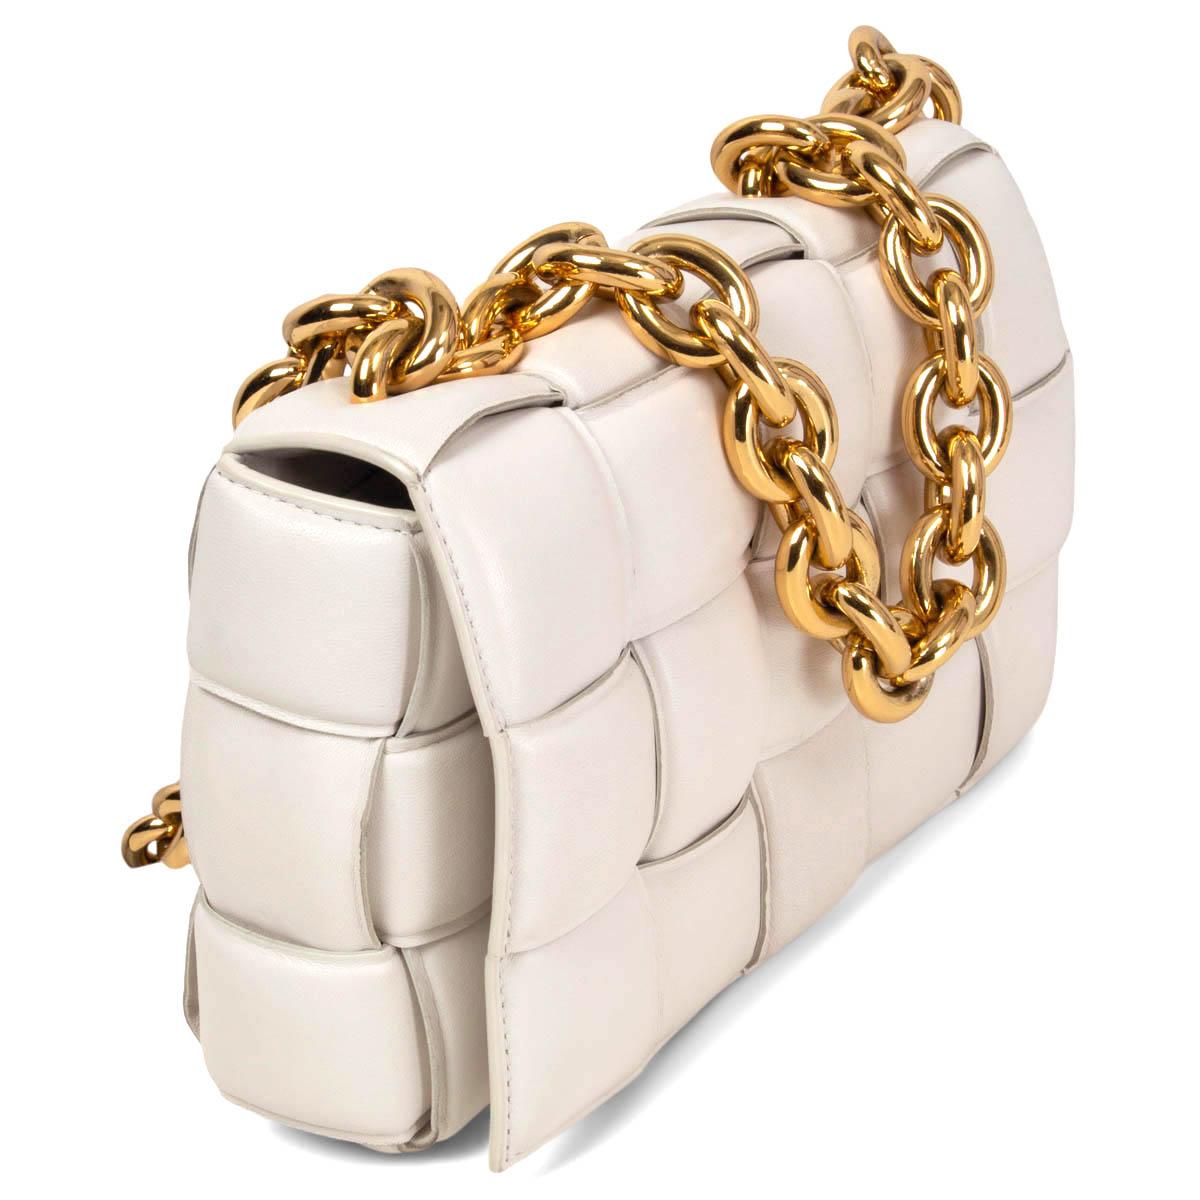 100% authentic Bottega Veneta Chain Cassette Shoulder Bag in chalk Nappa leather featuring chunky chain gold-tone top handle and shoulder strap. Has been carried and shows some soft signs of wear on the front flap, a small light pink mark and on the